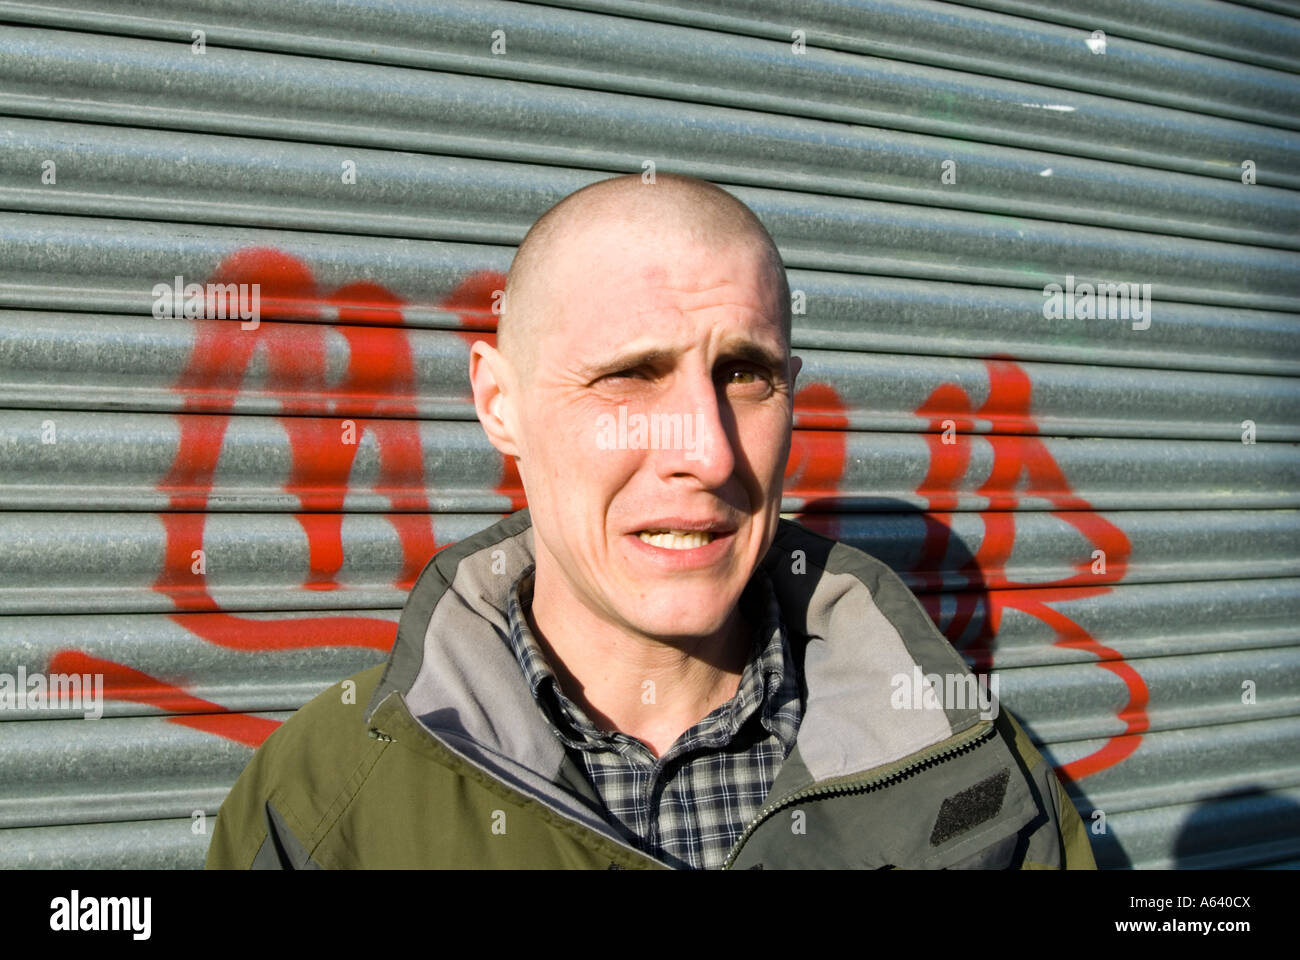 Skinhead man with worried and frightened expression London England UK Stock Photo